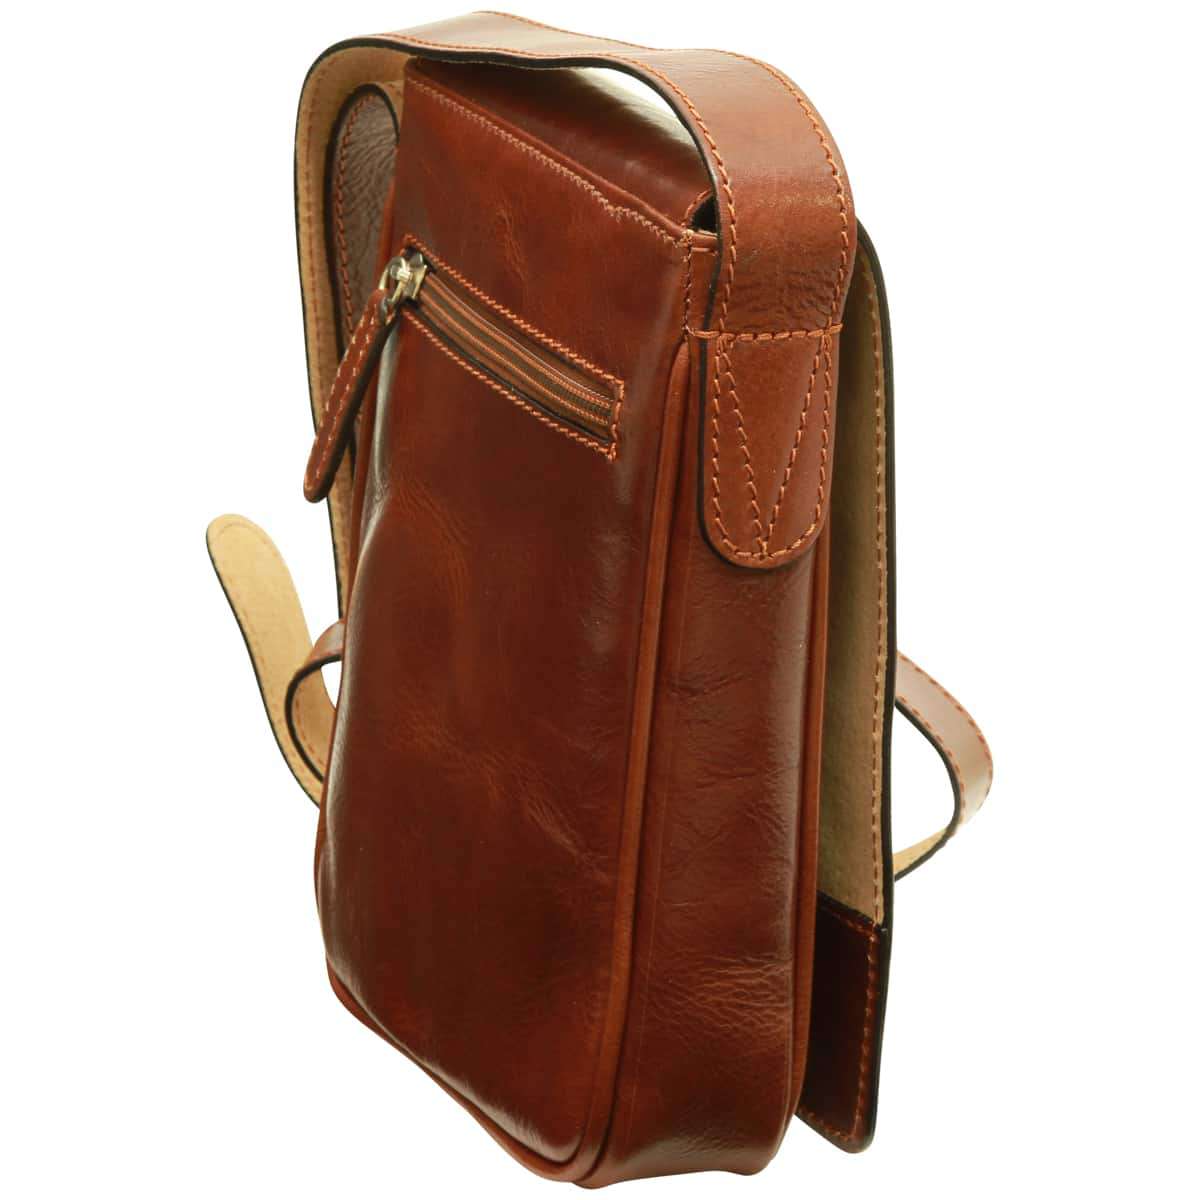 Cowhide leather cross body bag - Brown | 070805MA UK | Old Angler Firenze